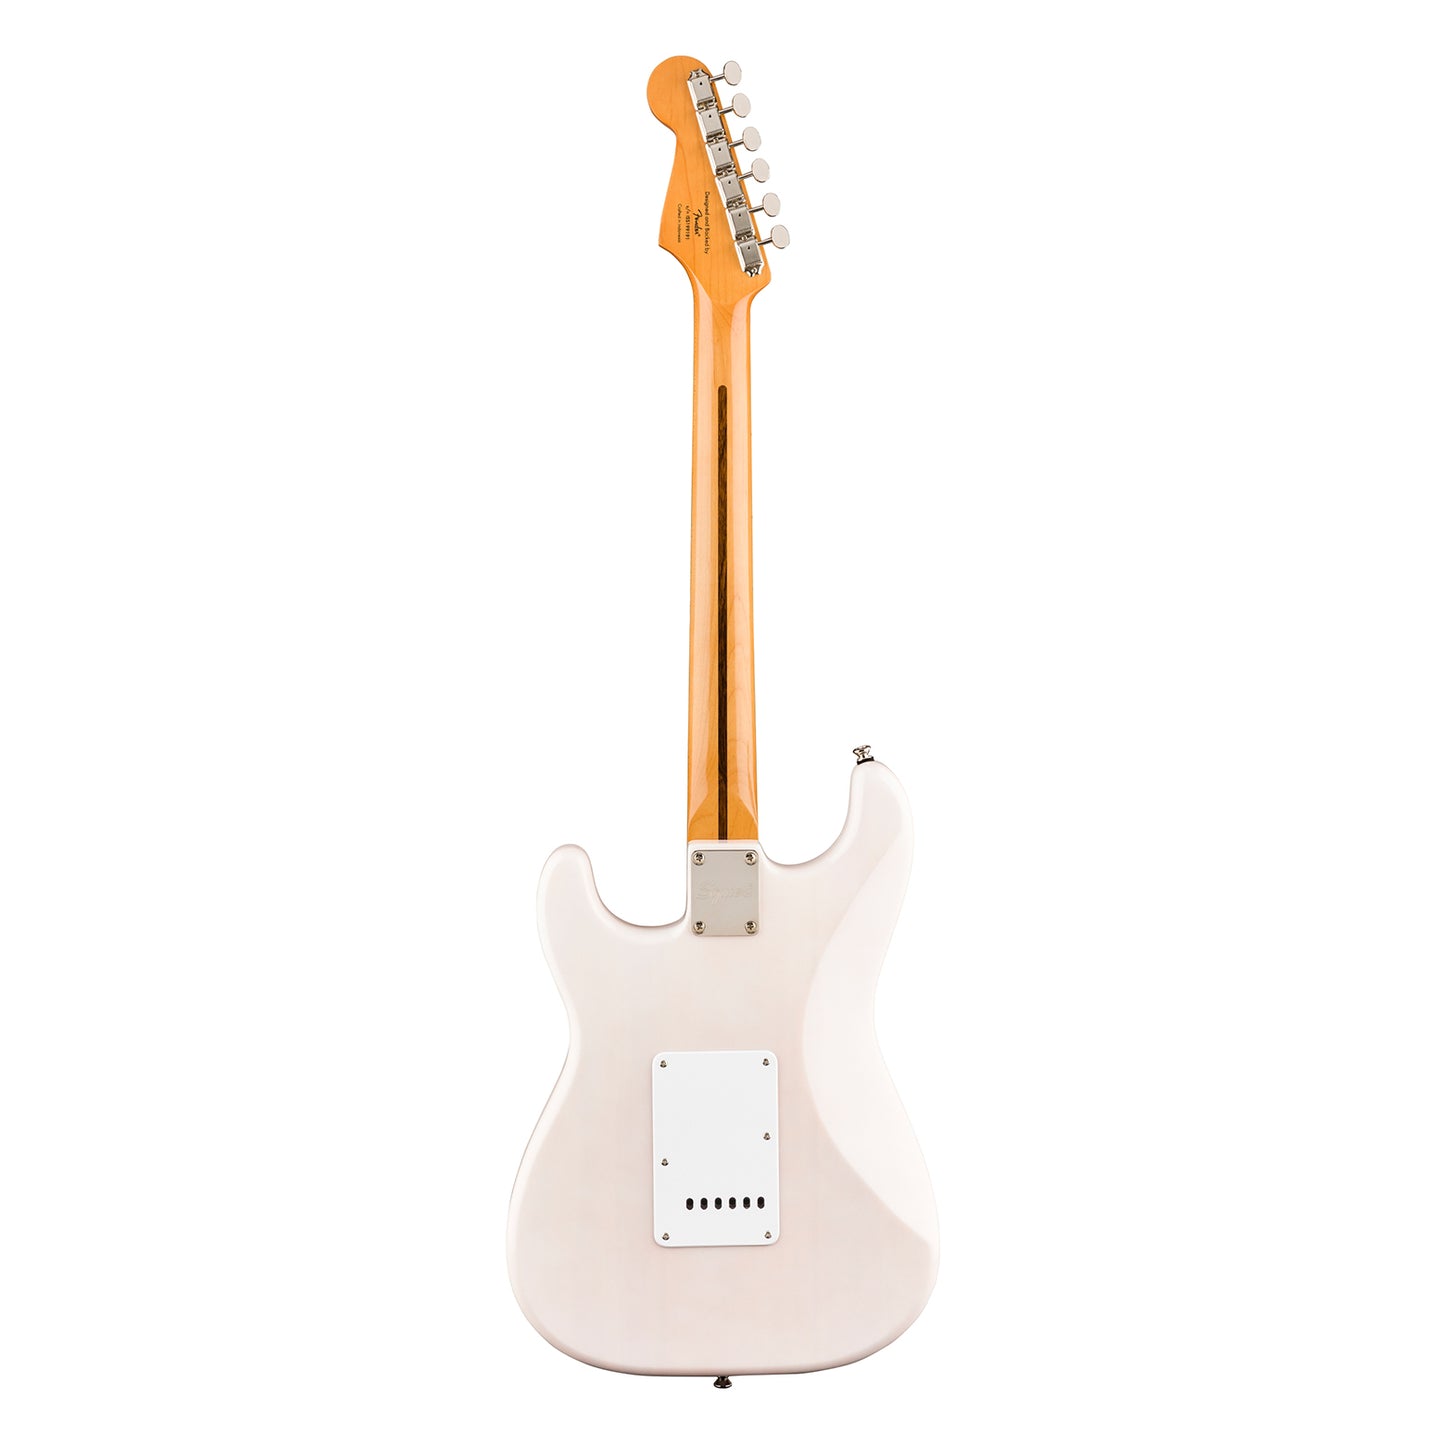 Squier by Fender Classic Vibe 50s Stratocaster Electric Guitar with SSS Pickup, Vintage Style Tremolo, Maple Fingerboard (Sunburst, White Blonde, Red)